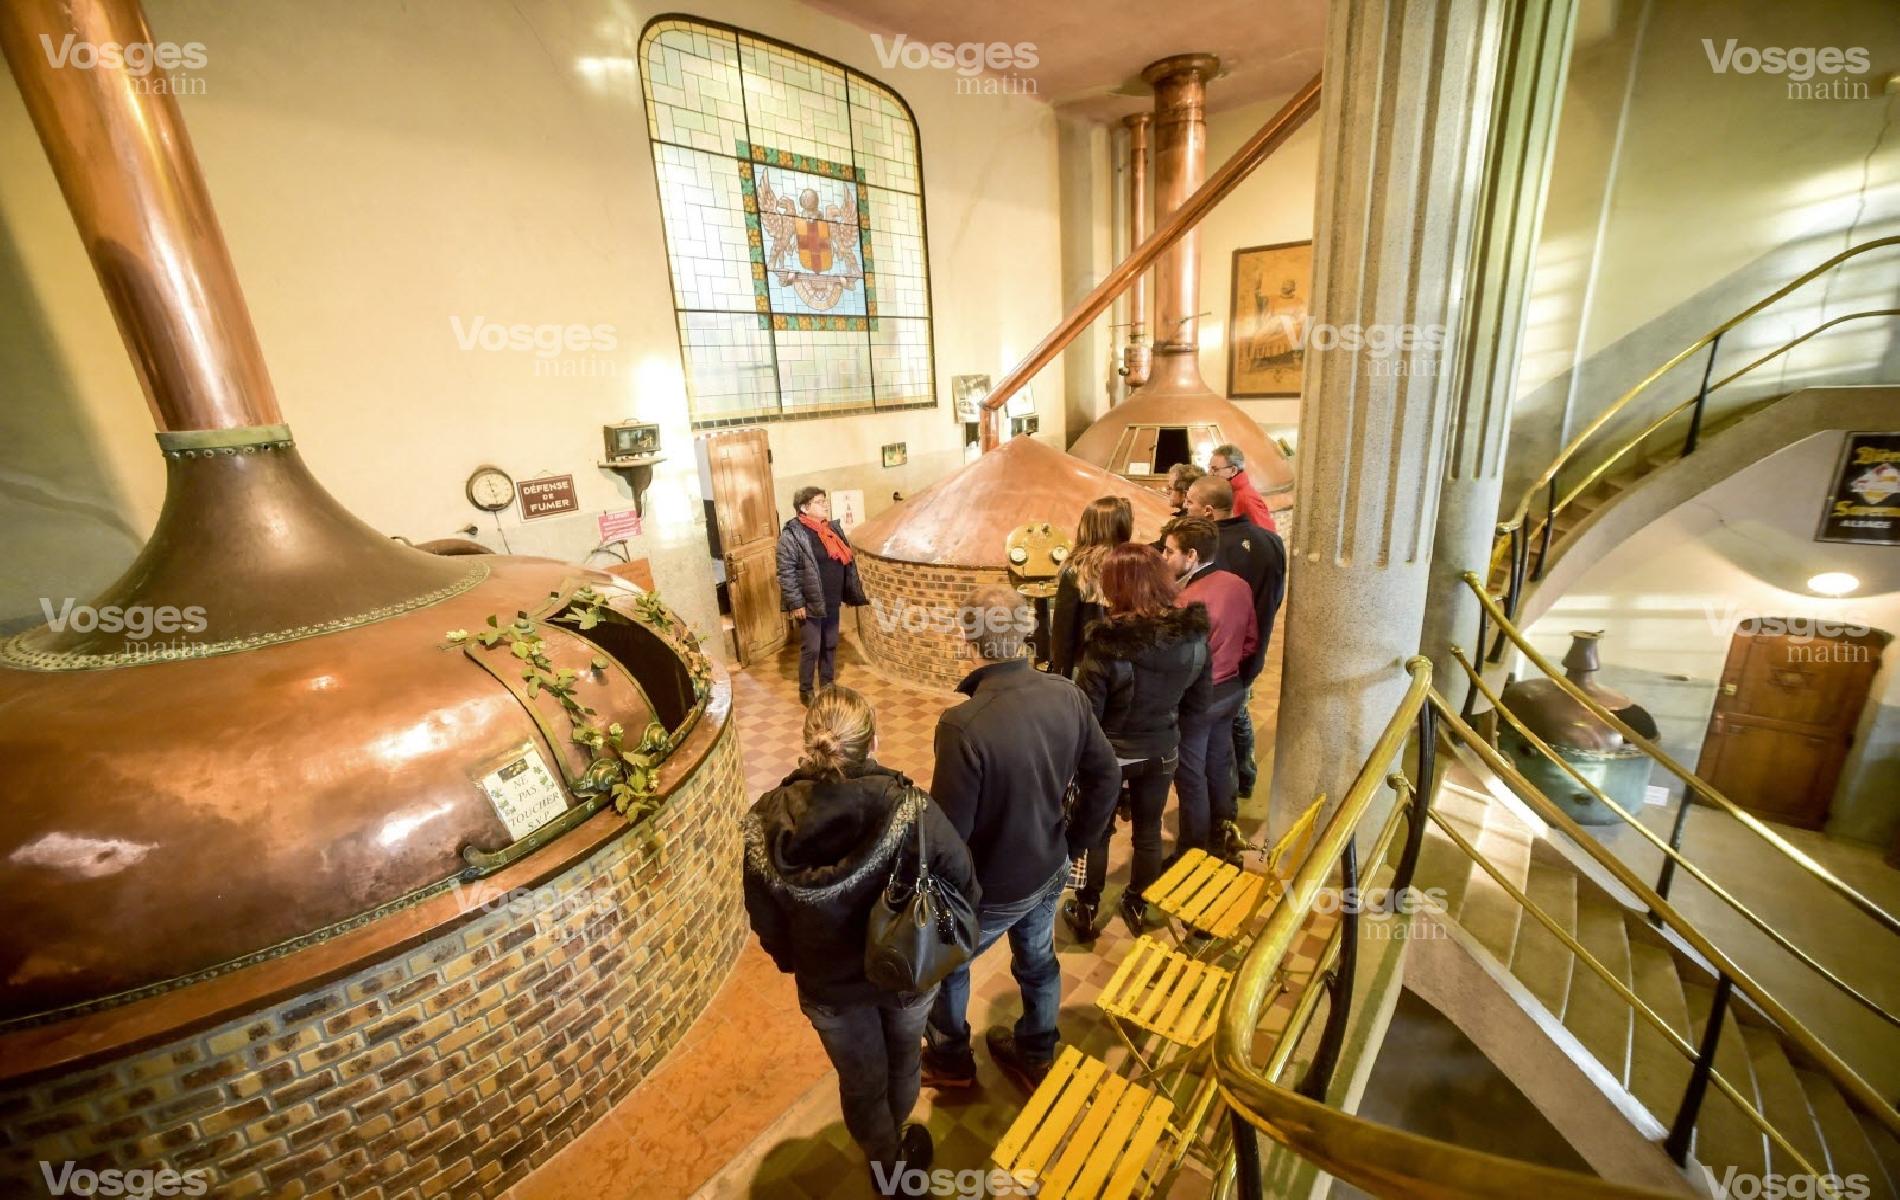 Illon and its eco brewery museum